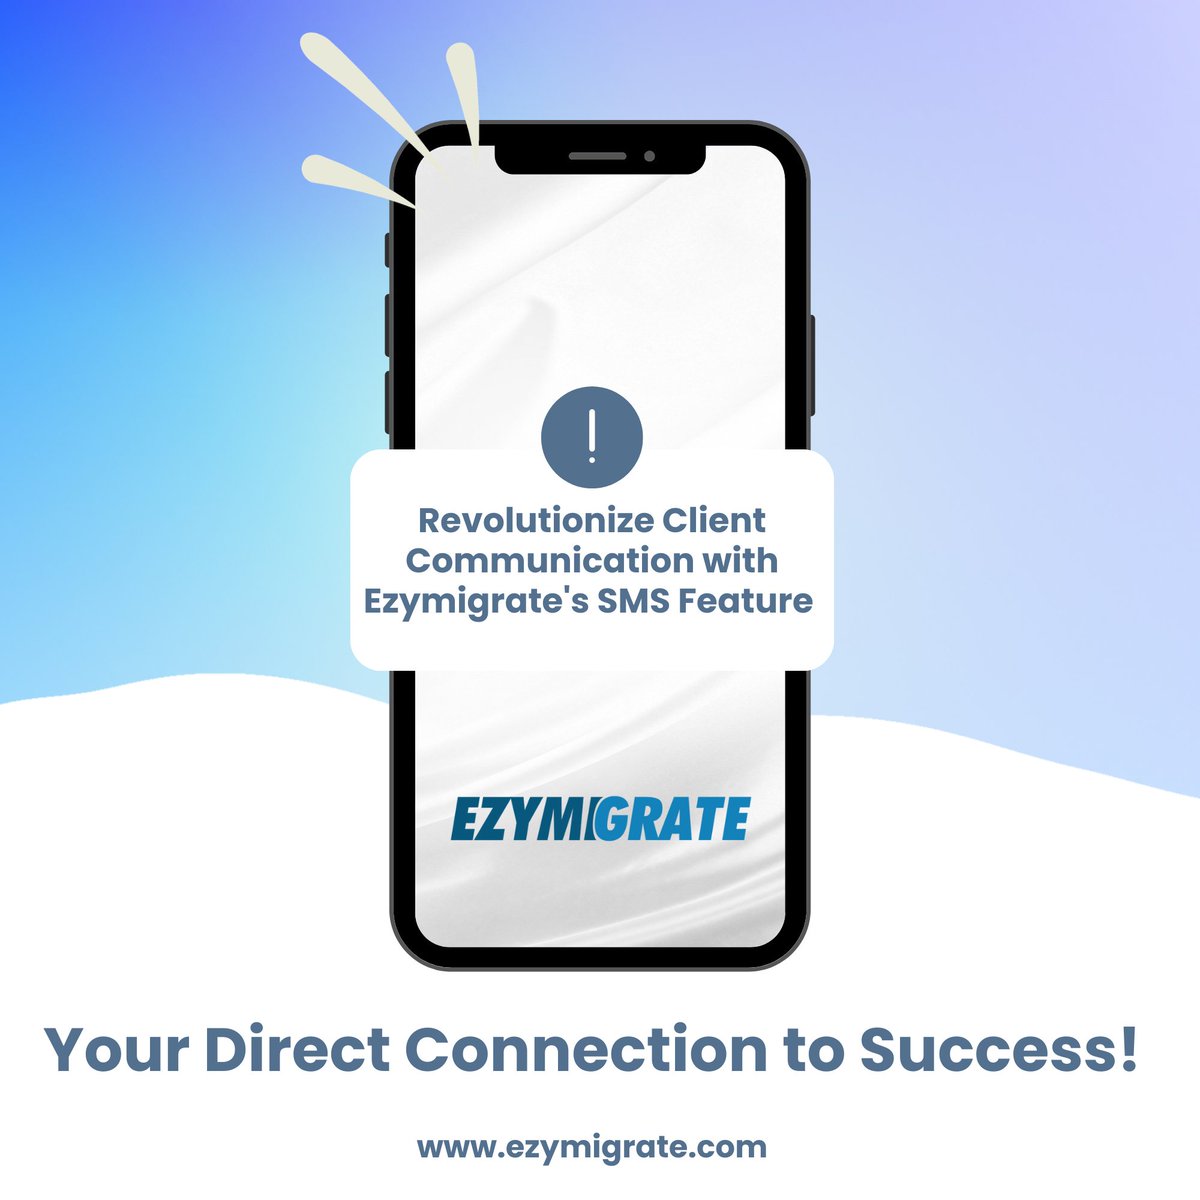 🚀 Elevate client engagement with Ezymigrate's SMS feature in our CRM system! 📱💬 Unlock direct communication, prompt responses, and exceptional service. Join the SMS revolution at ezymigrate.com today! #Ezymigrate #CRM #ClientCommunication